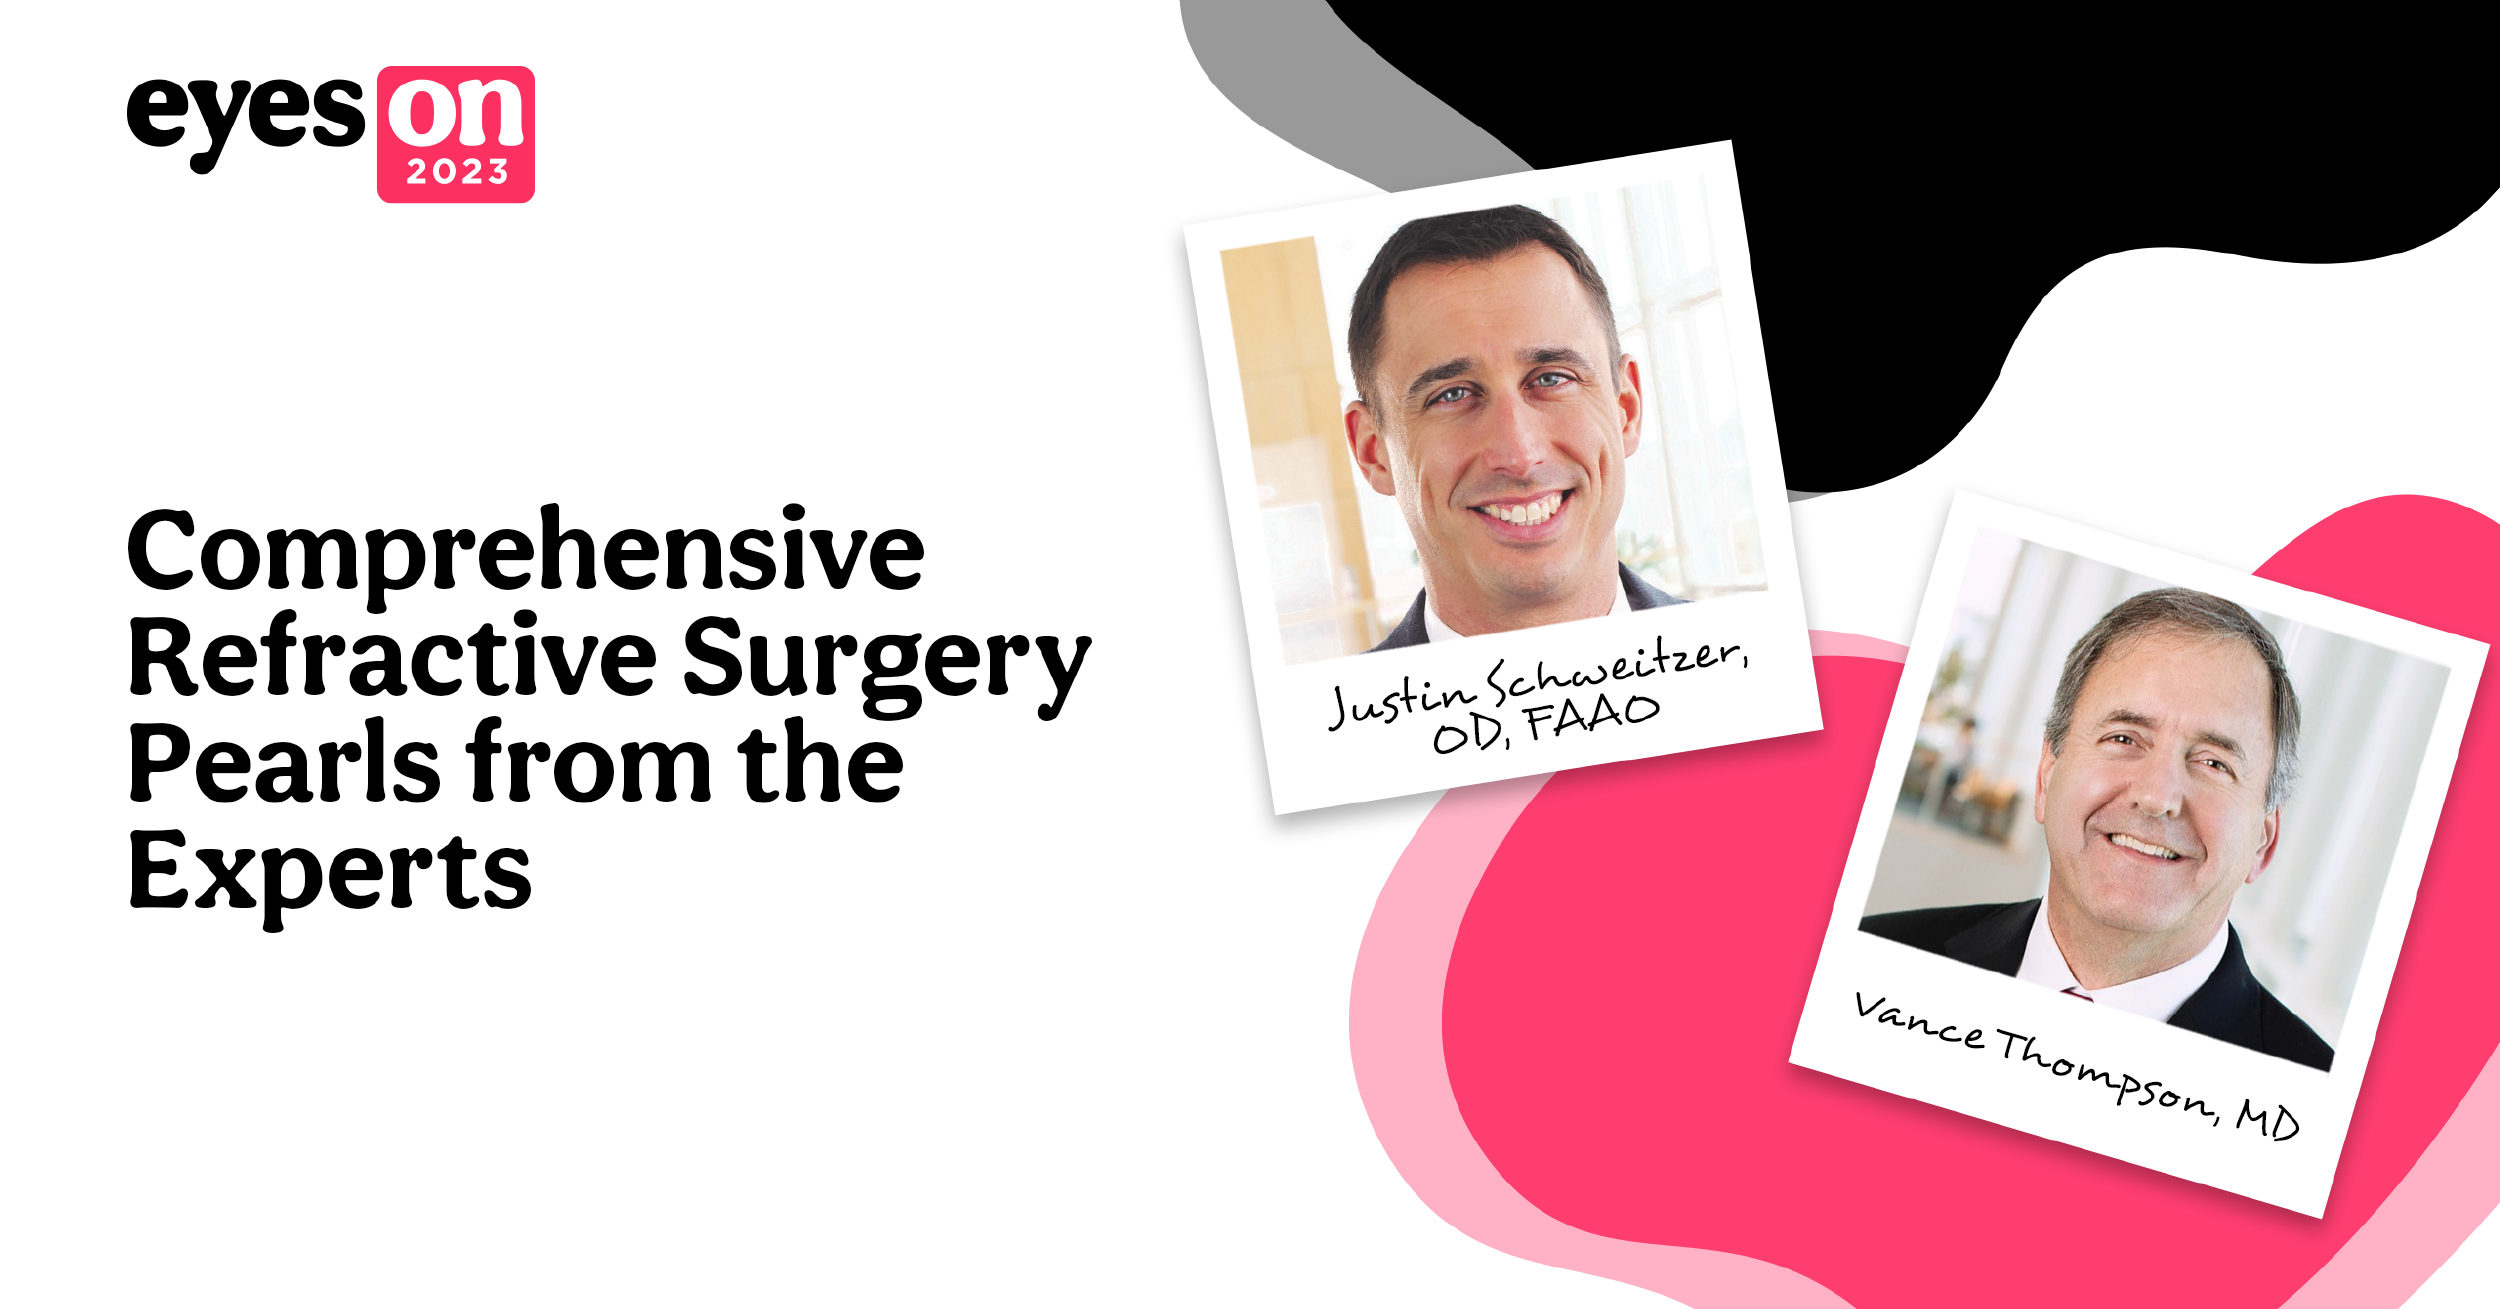 Comprehensive Refractive Surgery Pearls from the Experts